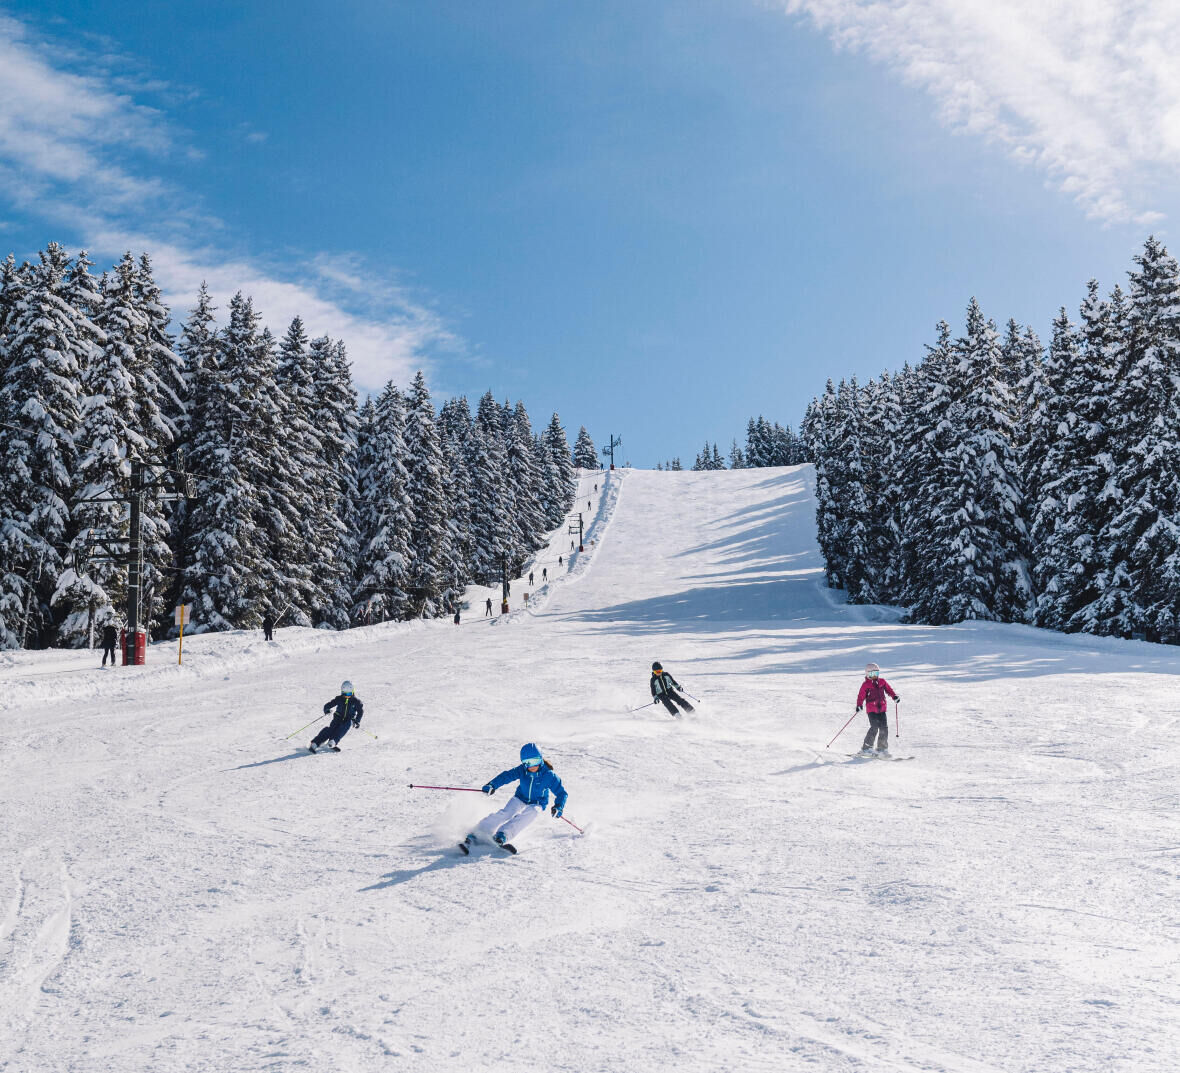 7 TIPS FOR HAVING A GREAT SKI HOLIDAY WITH TEENAGERS